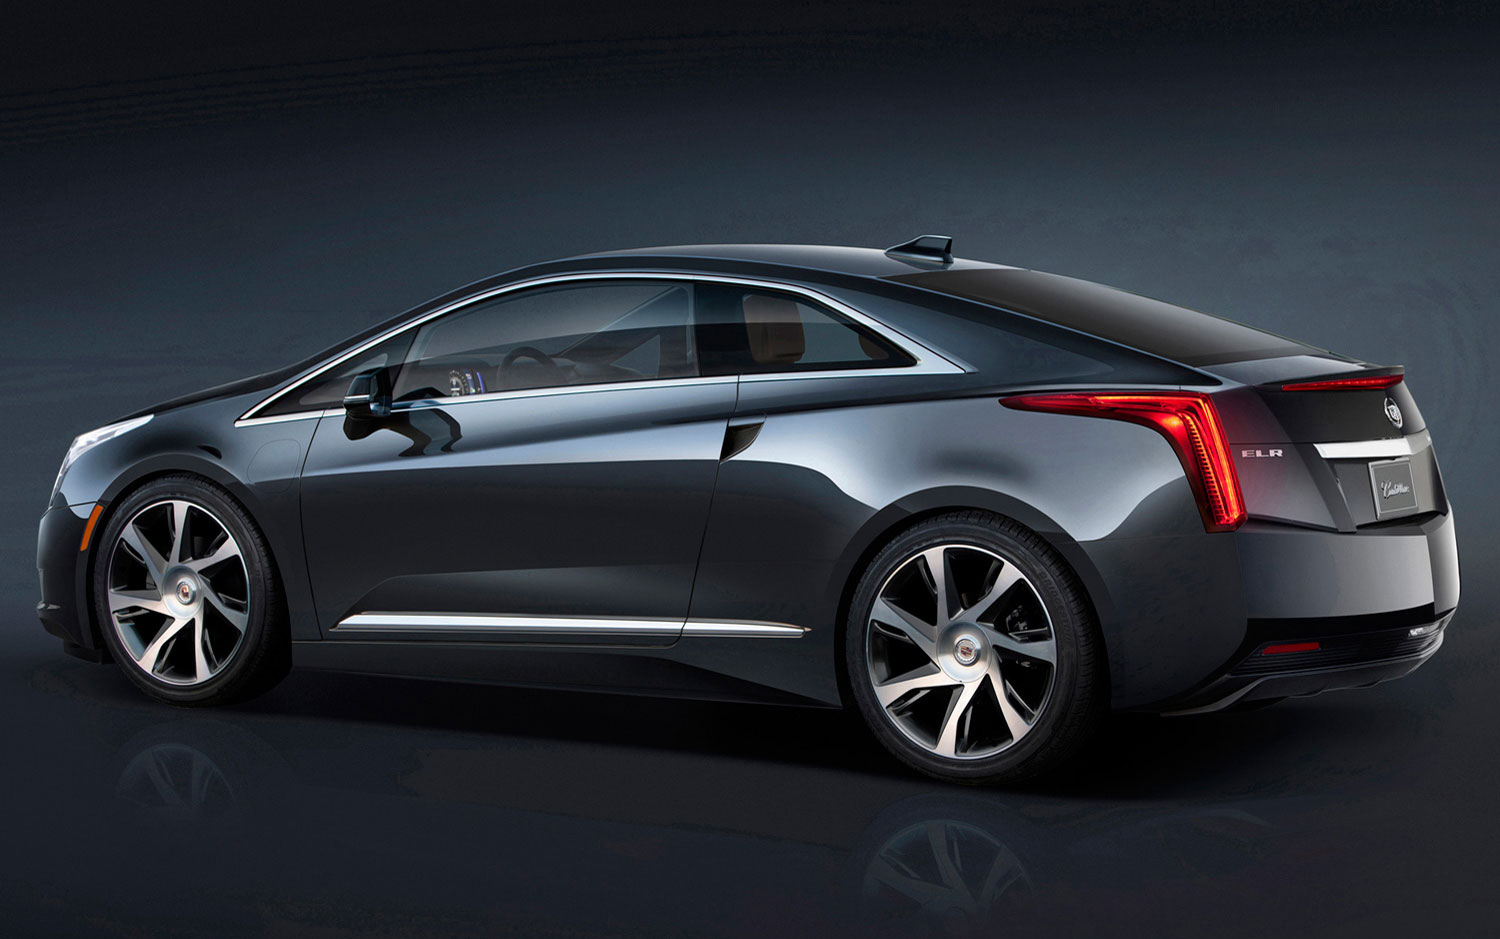 Cars Model 2013 2014: Cadillac Lineup to Double With Flagship Sedan